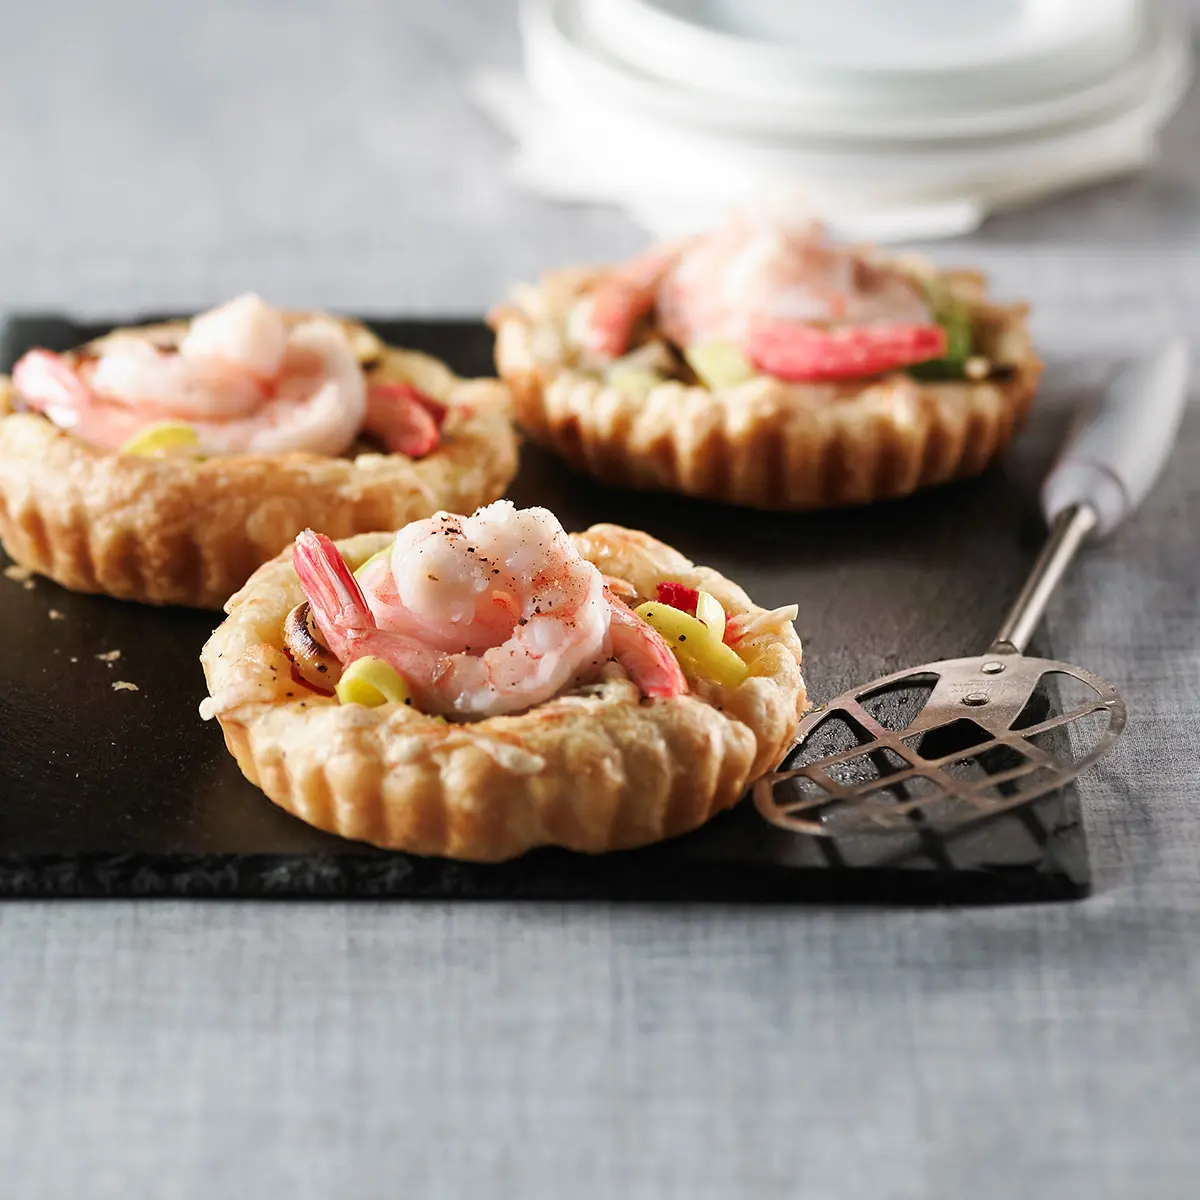 Shrimps and leeks puff pastry